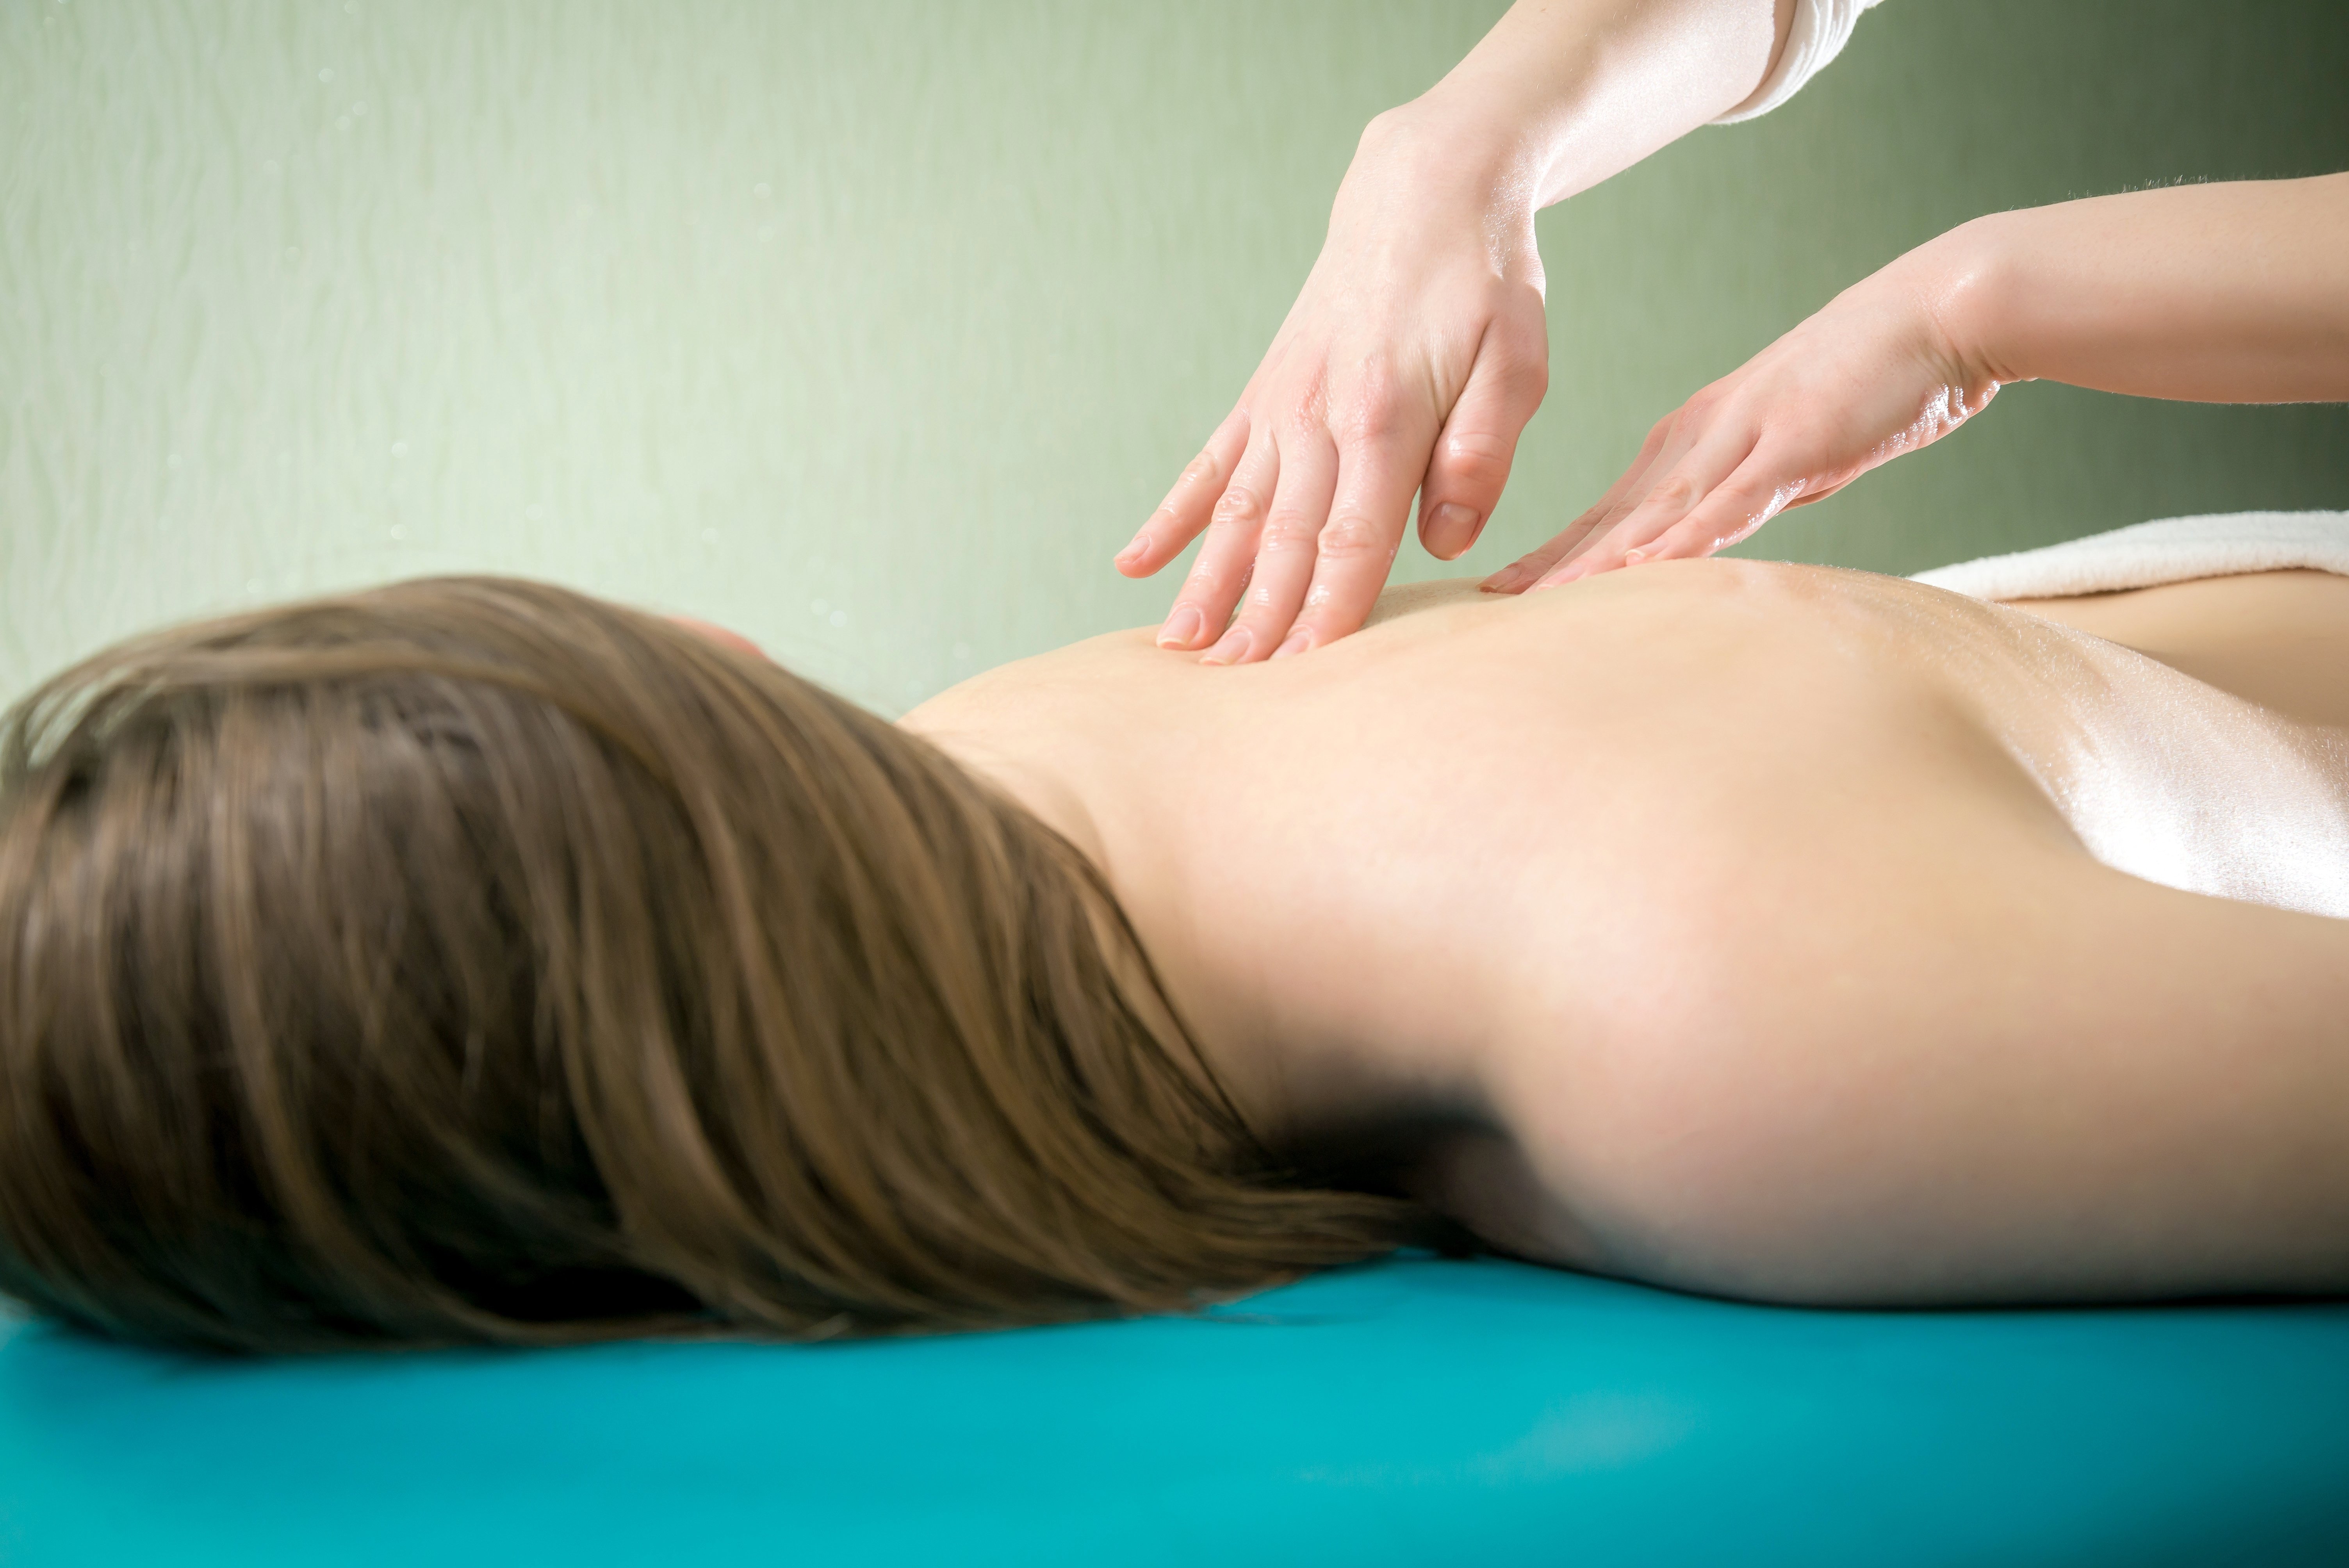 5 Common Questions About Cancer and Oncology Massage Therapy